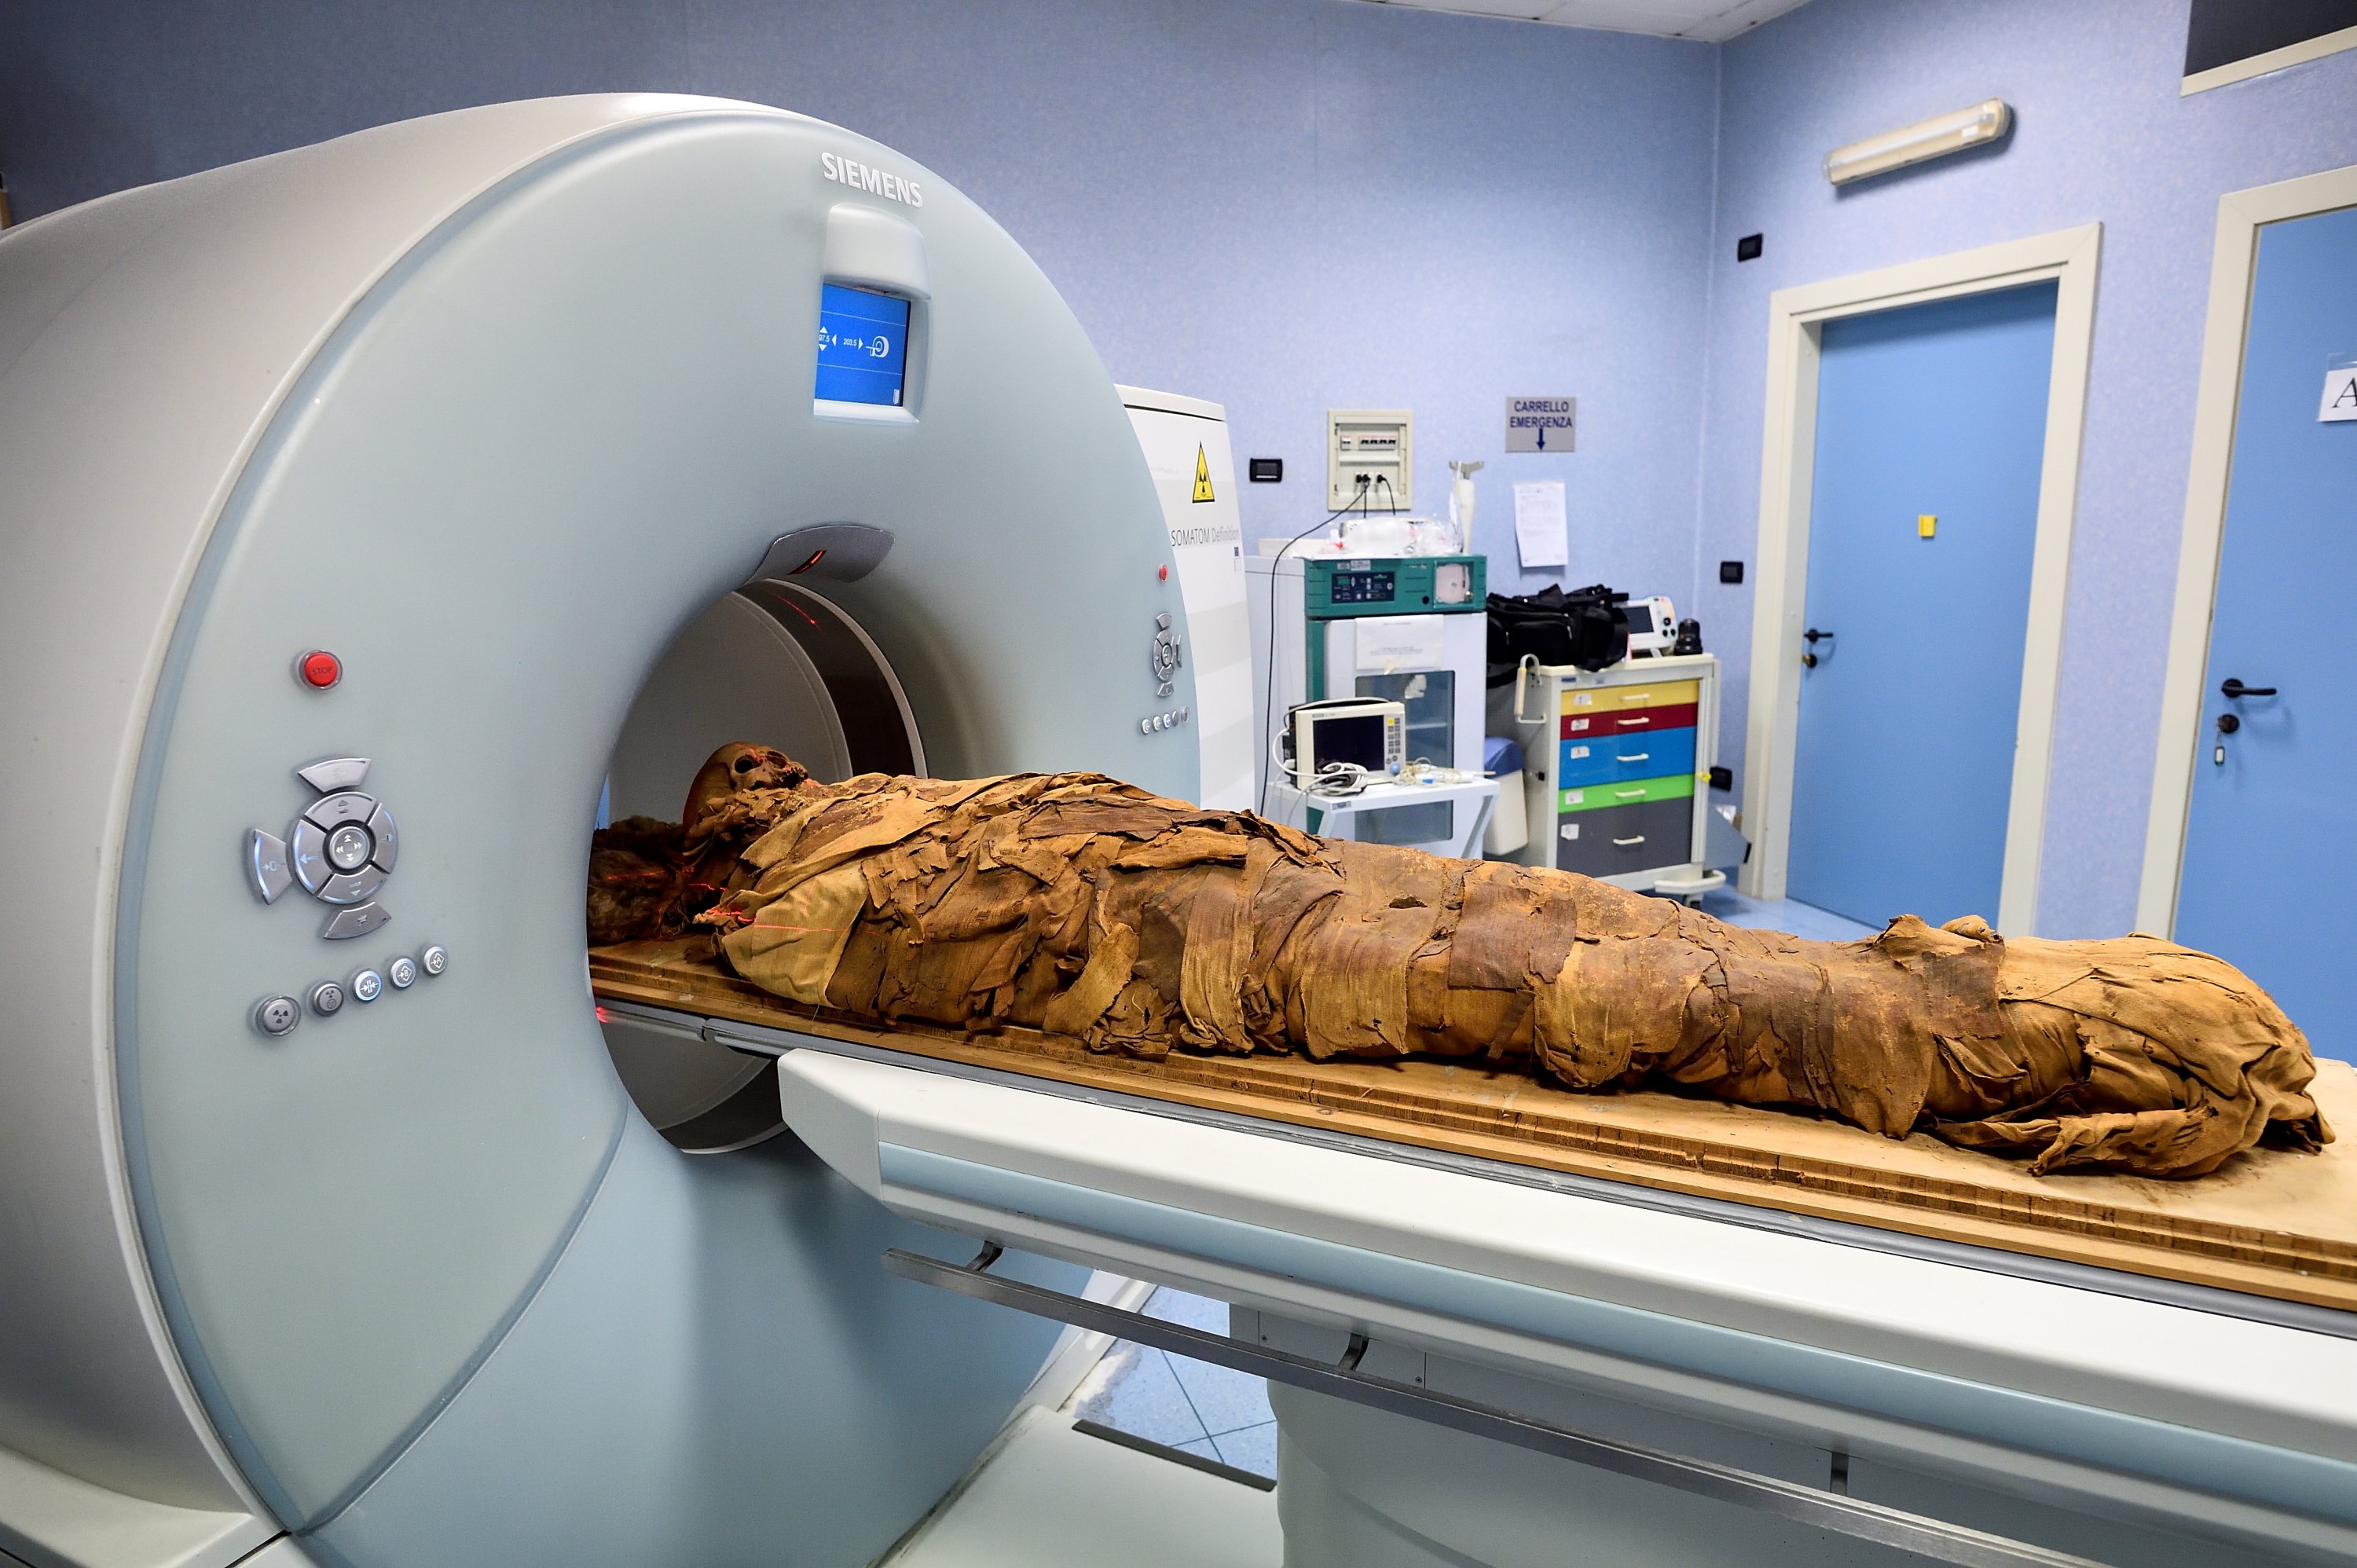 An Egyptian mummy undergoes a CT scan in order for researchers to investigate its history, at the Policlinico hospital in Milan, Italy, June 21, 2021. (Reuters Photo)